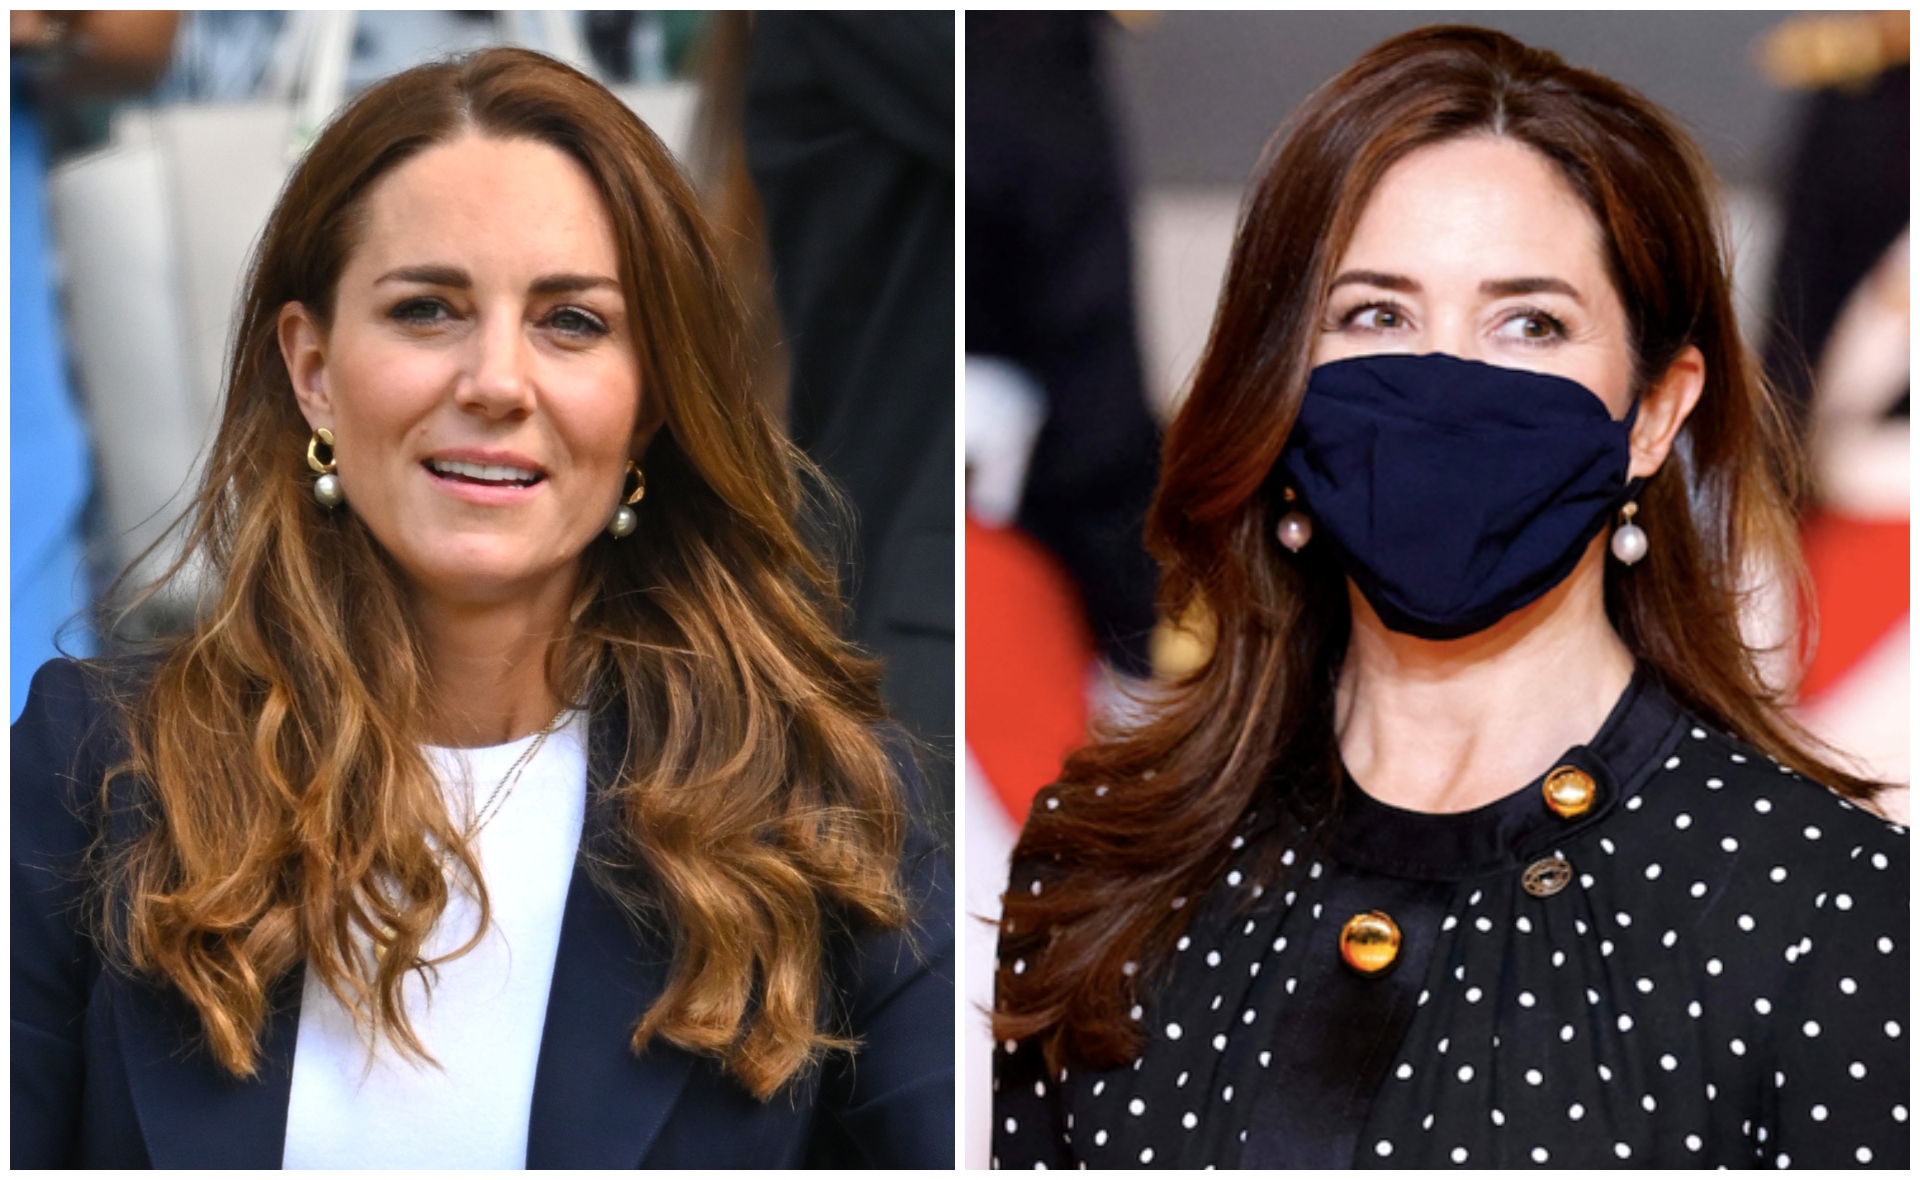 Duchess Catherine twinned outfits with Princess Mary within the same week – so there’s our new winter trend